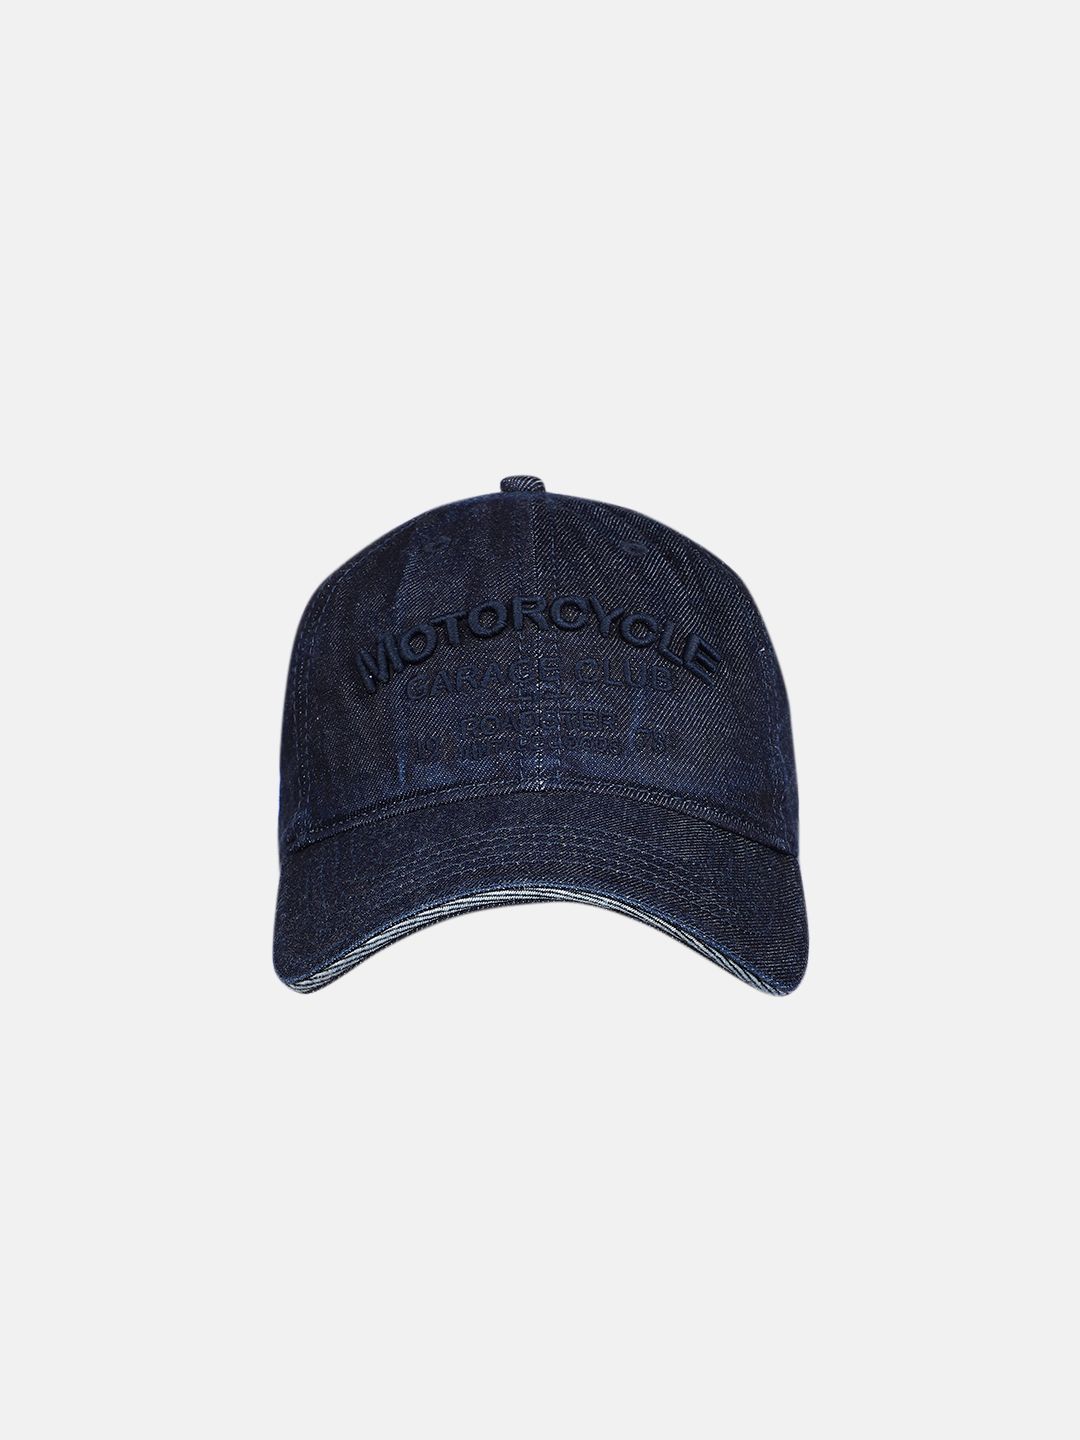 Roadster Unisex Navy Blue Embroidered Baseball Cap Price in India